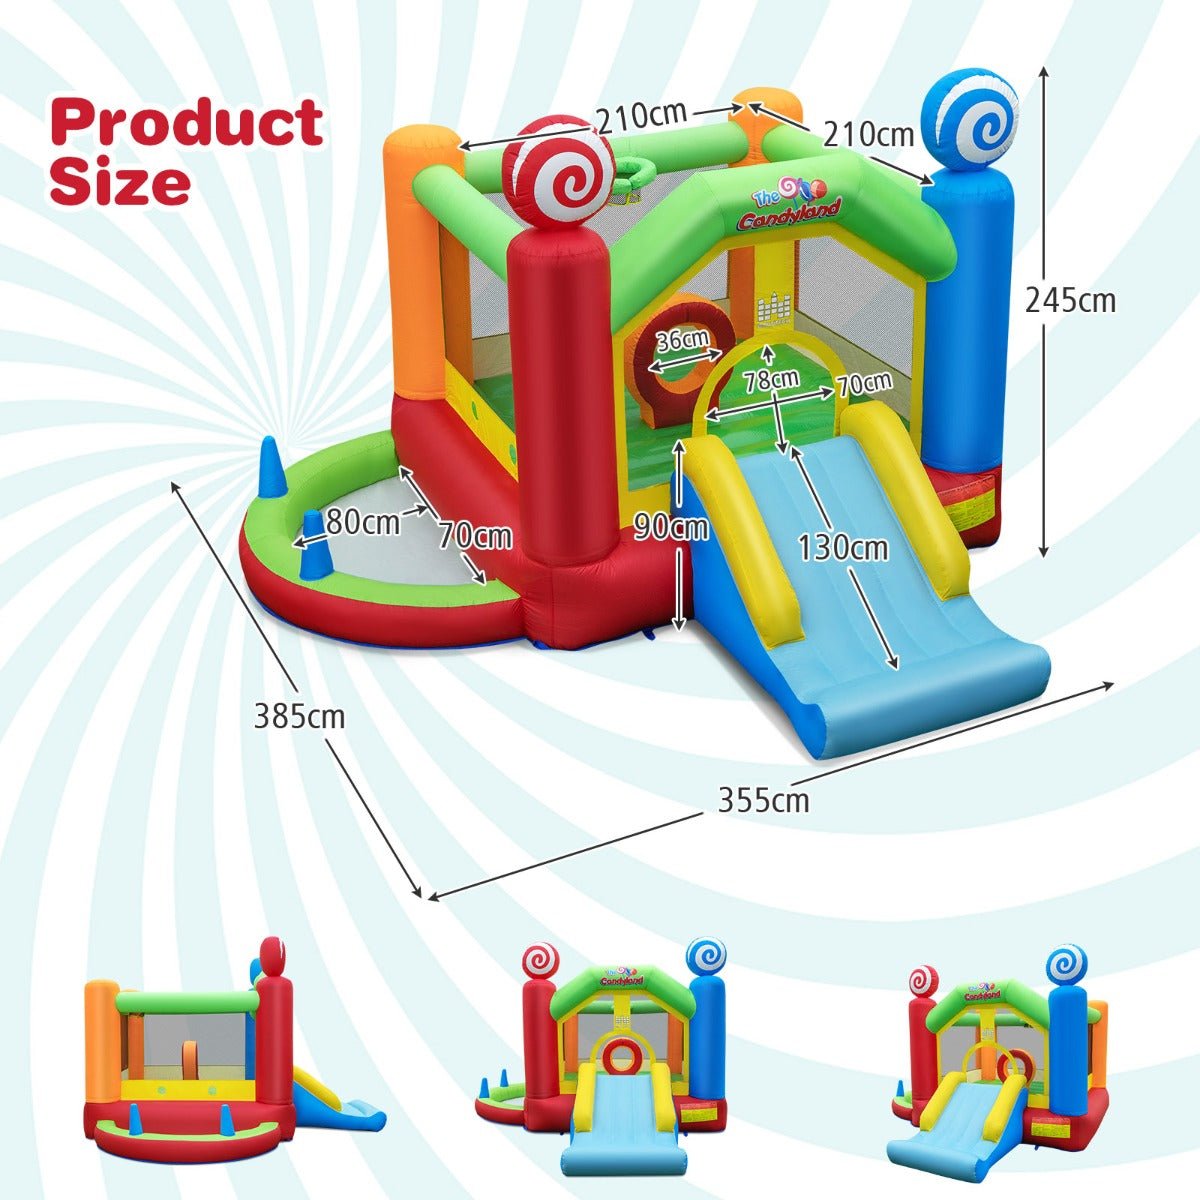 Candy Land Inflatable Bounce House - Your Ticket to Joy